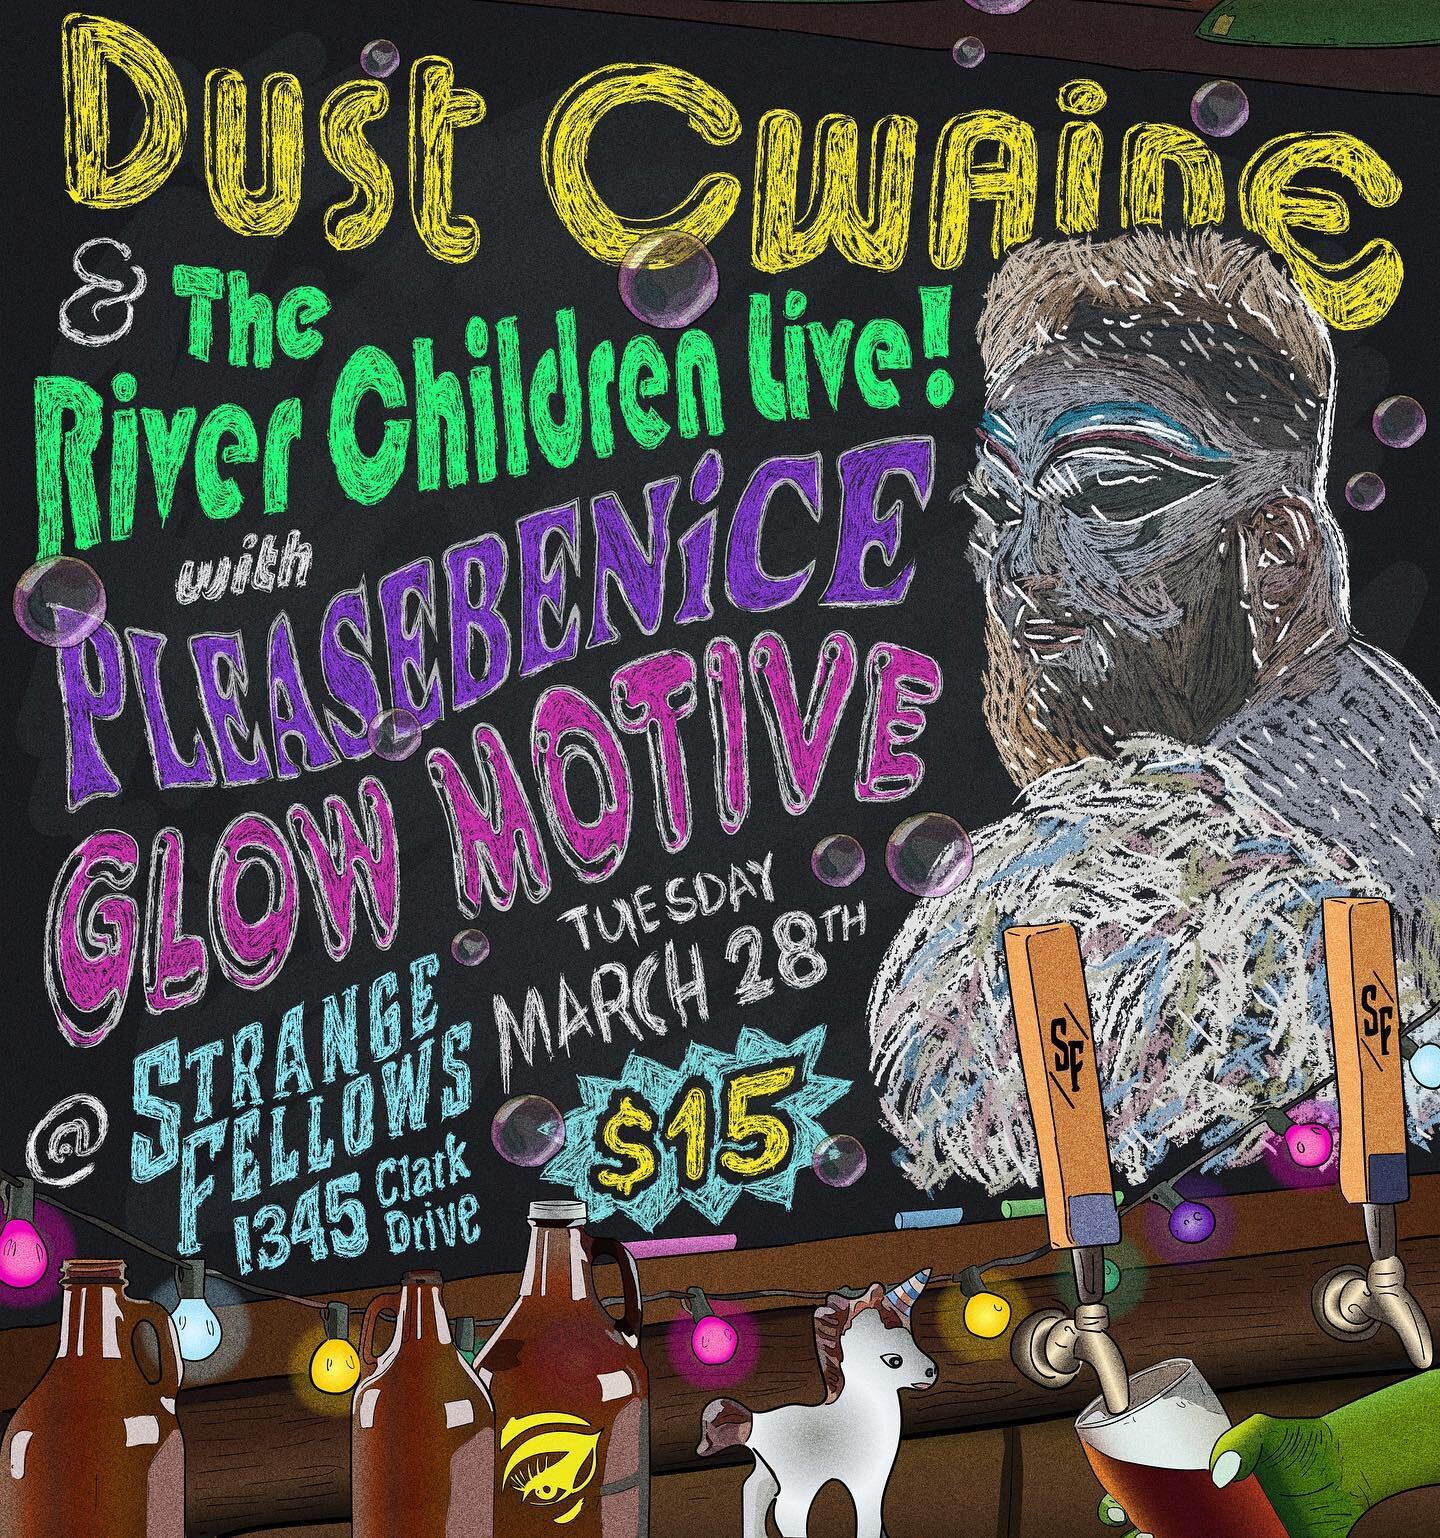 Dust Cwaine and their band The River Children are gonna be invading  @strangefellowsbrewing Tuesday March 28th with their queer music! You won&rsquo;t wanna miss this dose of queer joy! 
Get tix in bio!

$1 from every beverage consumed is being donat